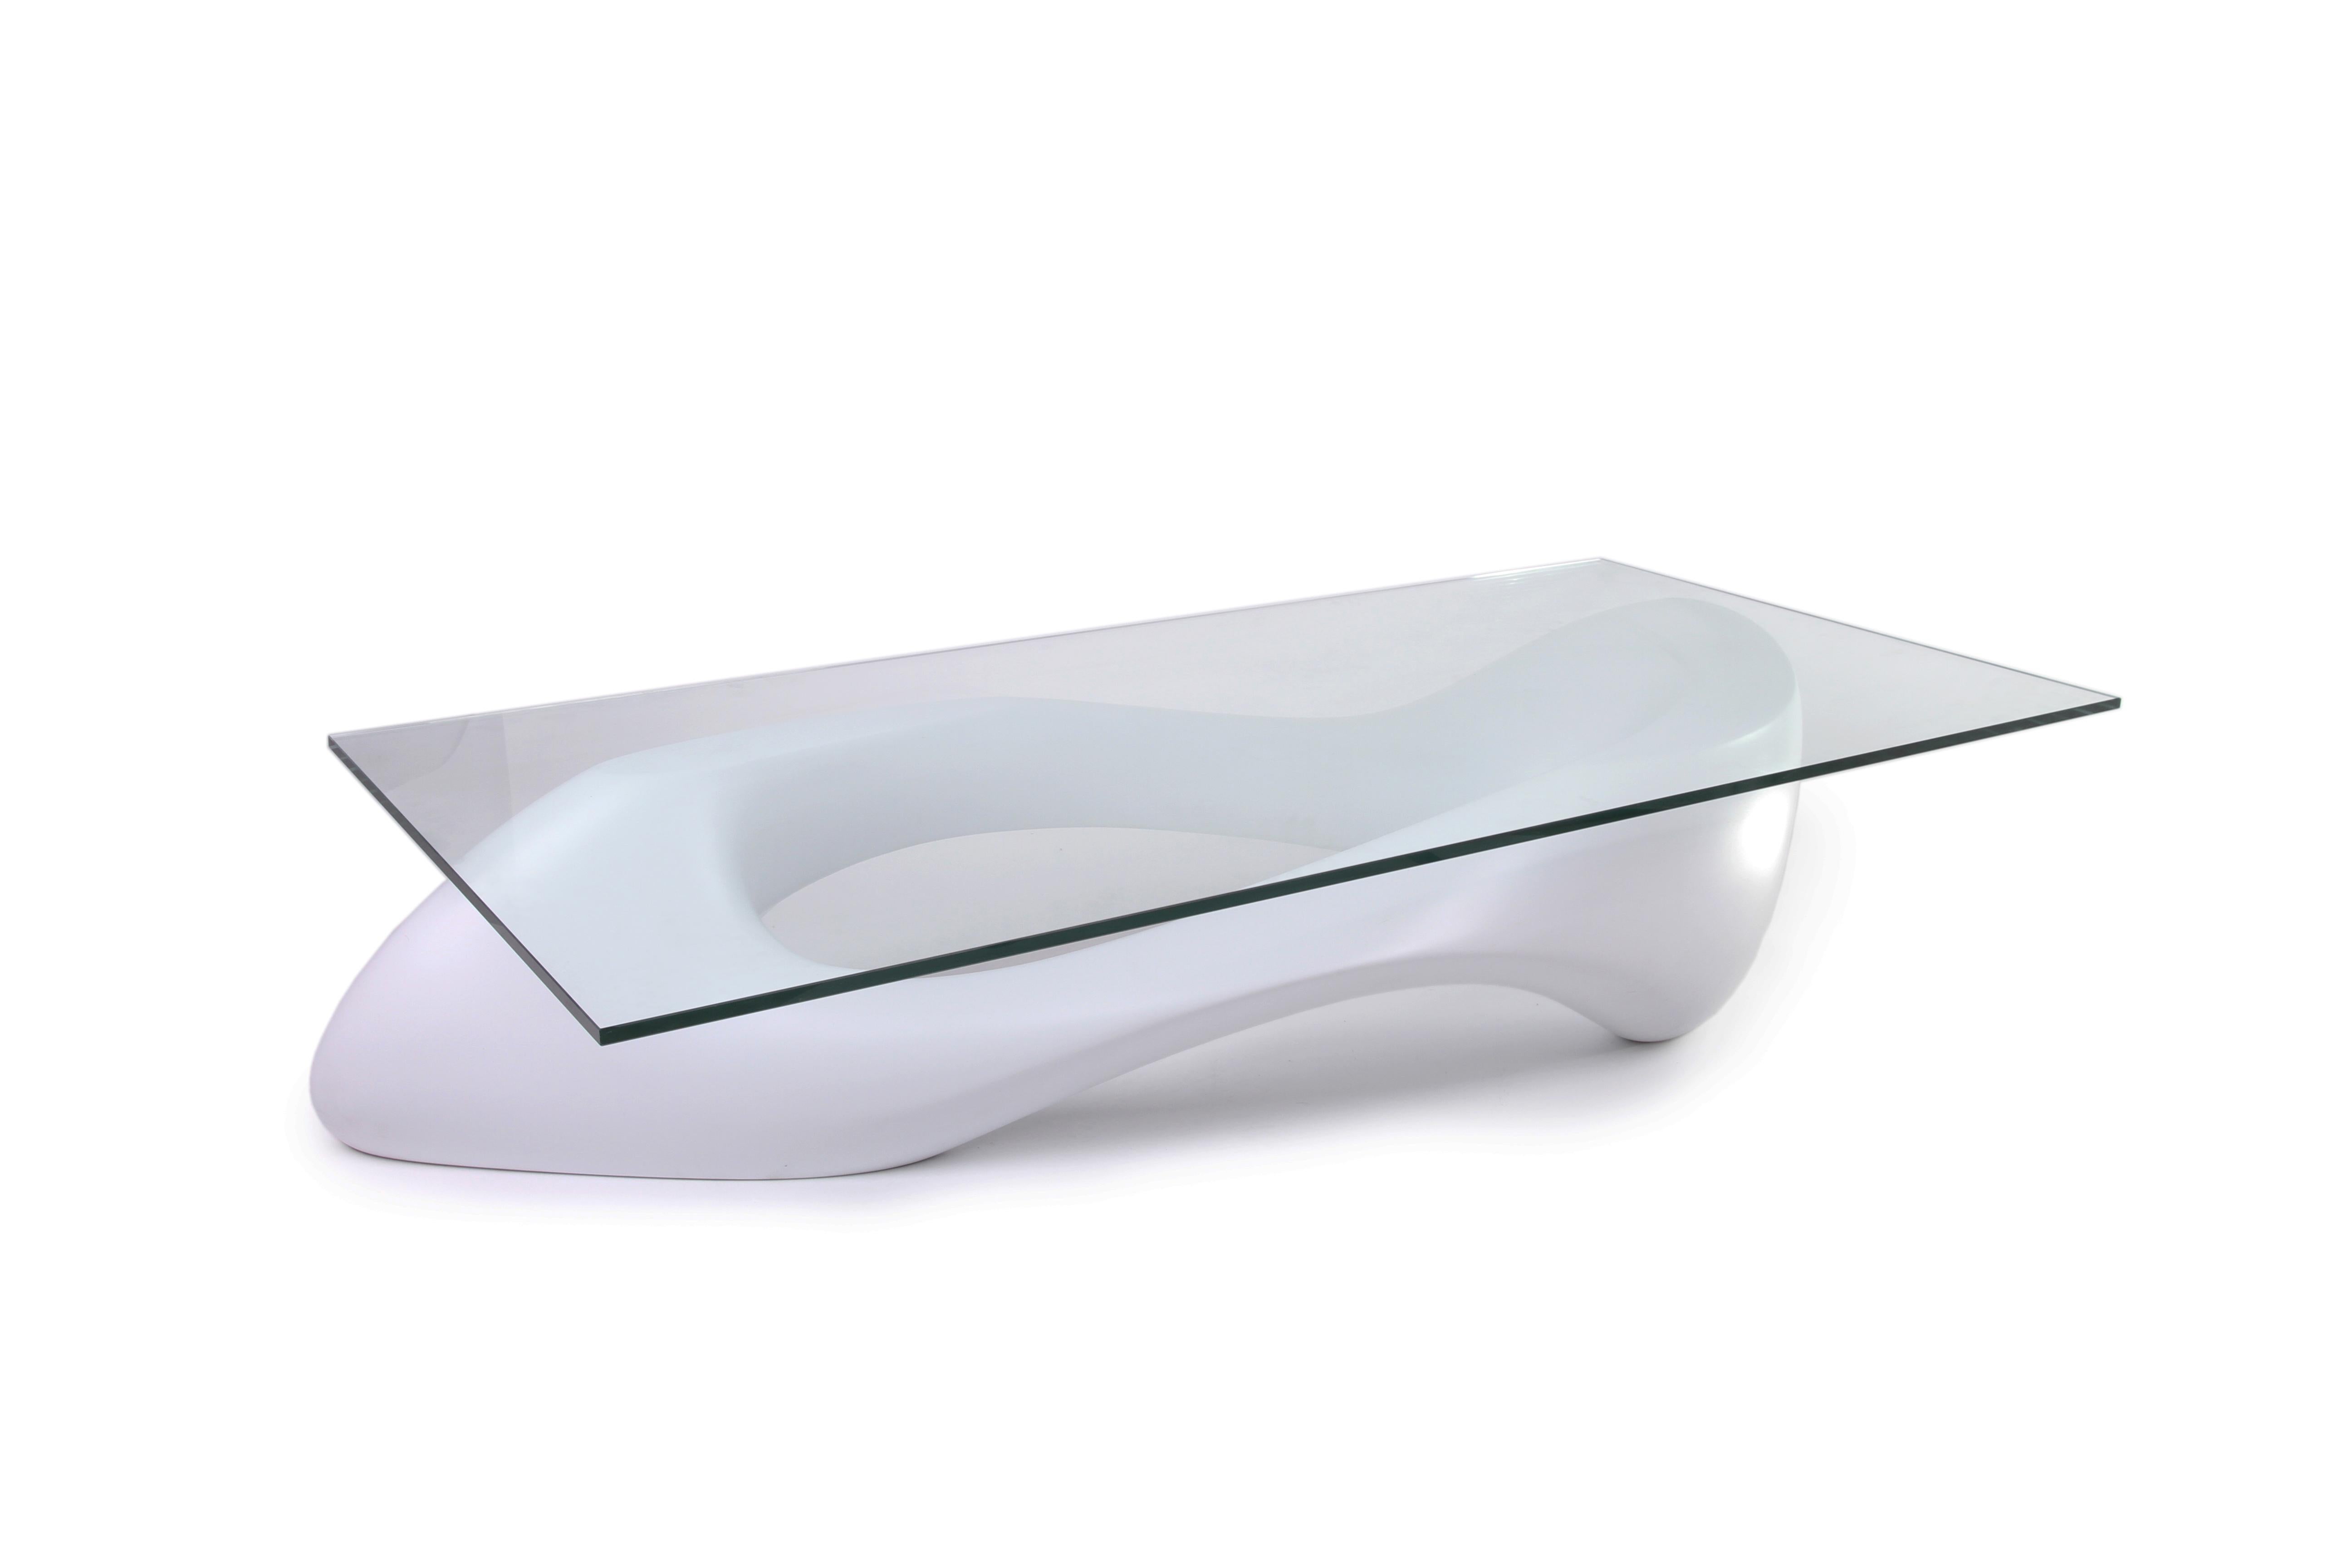 Lust coffee table is a futuristic sculptural art table with a dynamic form designed and manufactured by Amorph. Lust is made out of MDF with Lacquer finish. Measures: Lust comes with 1/2